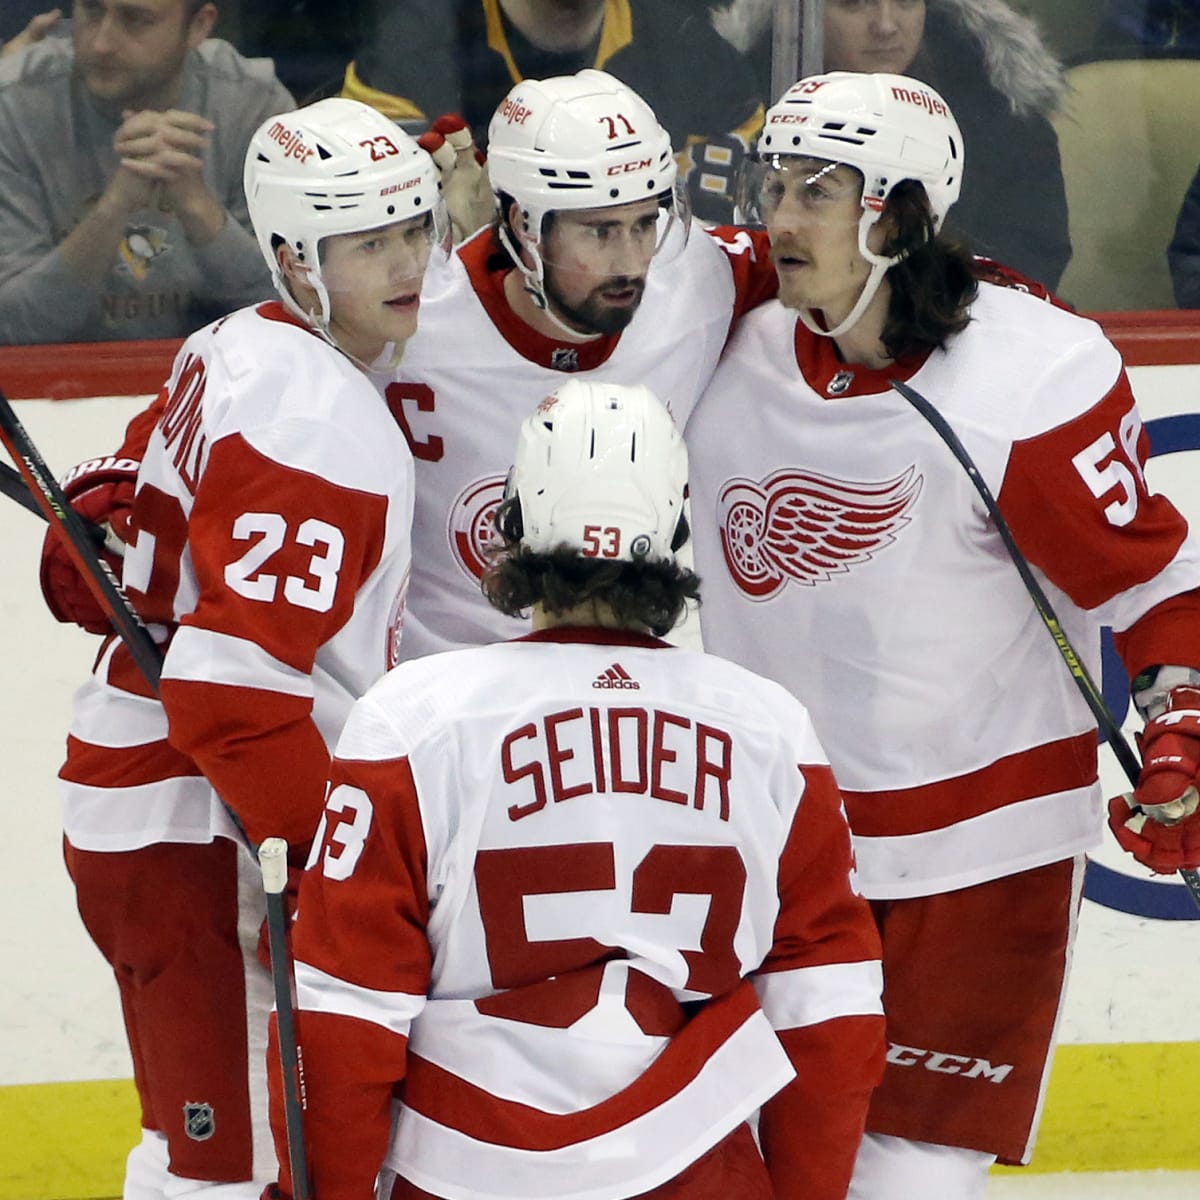 Red Wings make a minor change to their jerseys for 2022-23 season